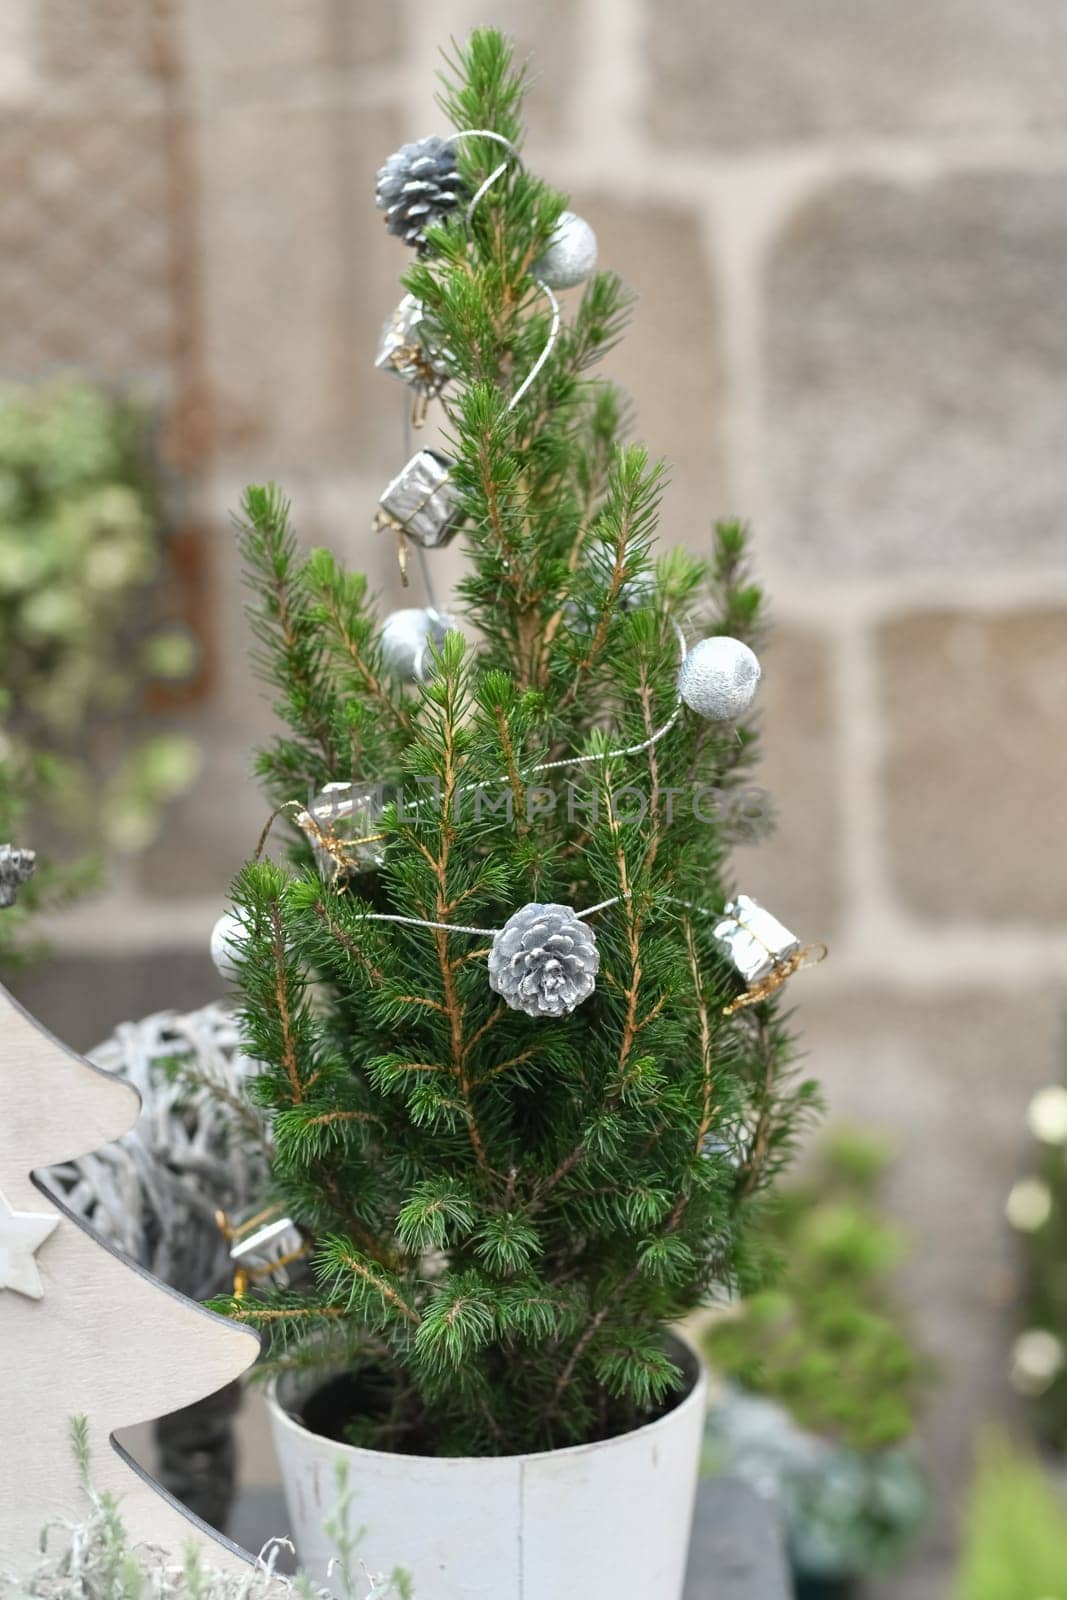 Decorated Christmas tree in a white pot in a shop